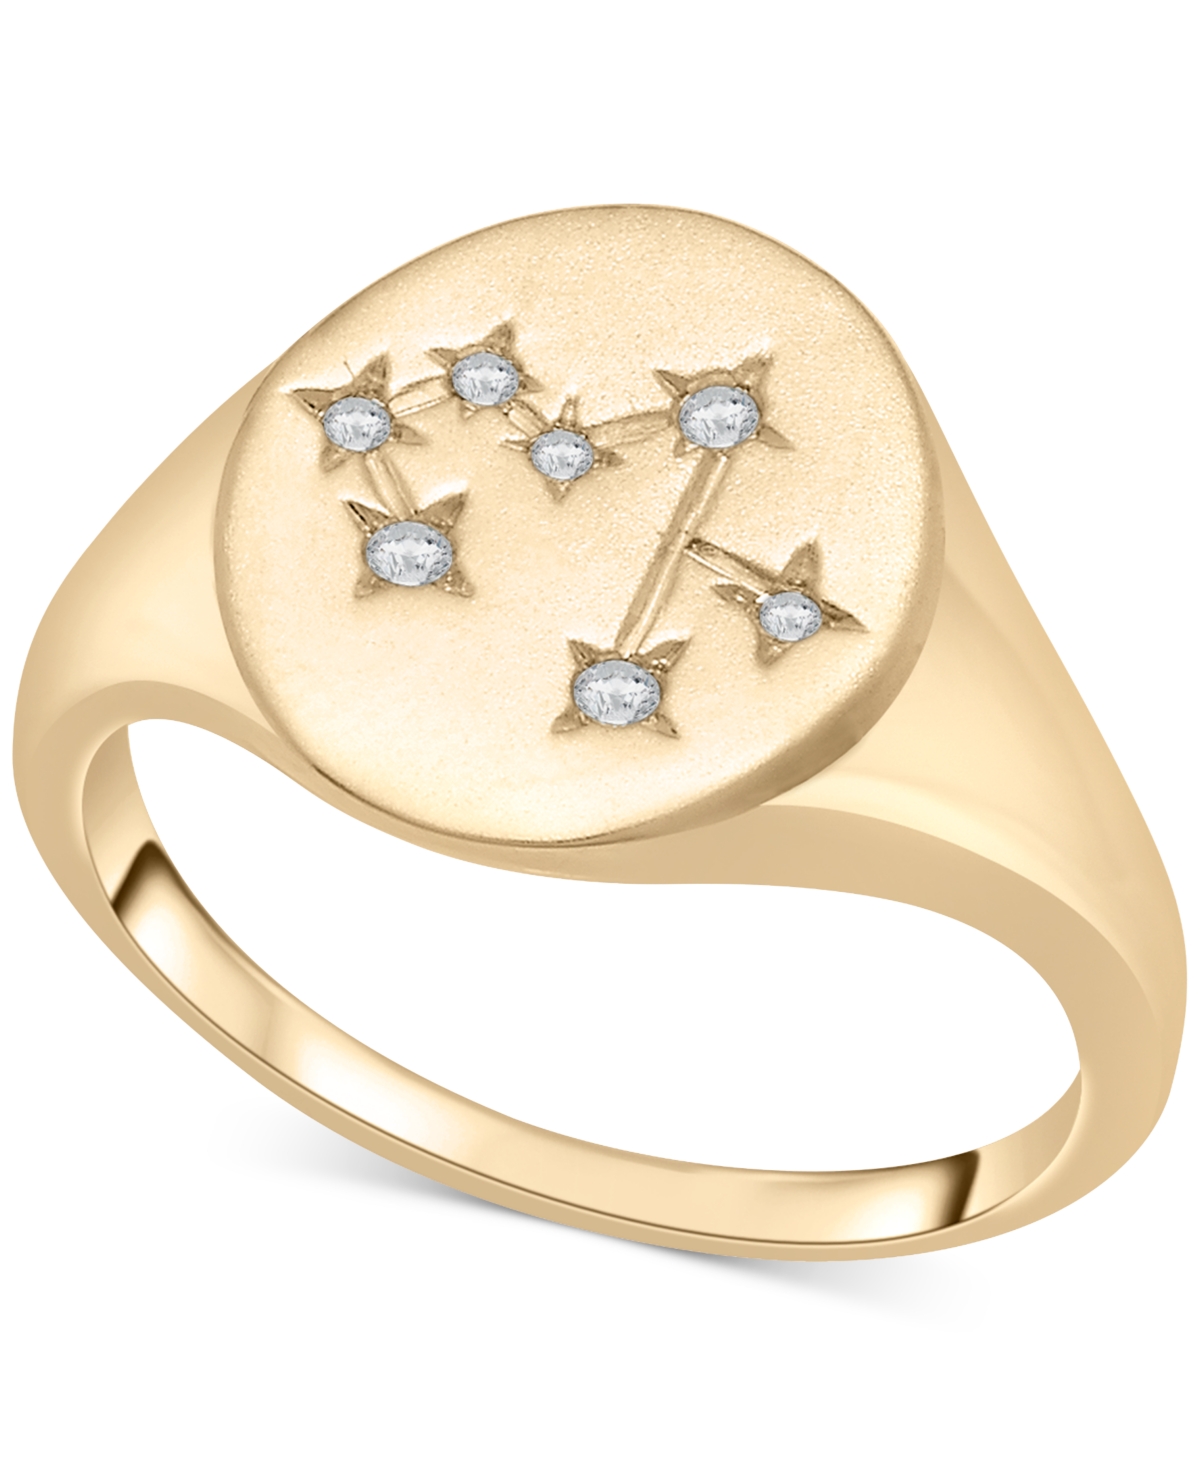 Diamond Sagittarius Constellation Ring (1/20 ct. t.w.) in 10k Gold, Created for Macy's - Yellow Gold